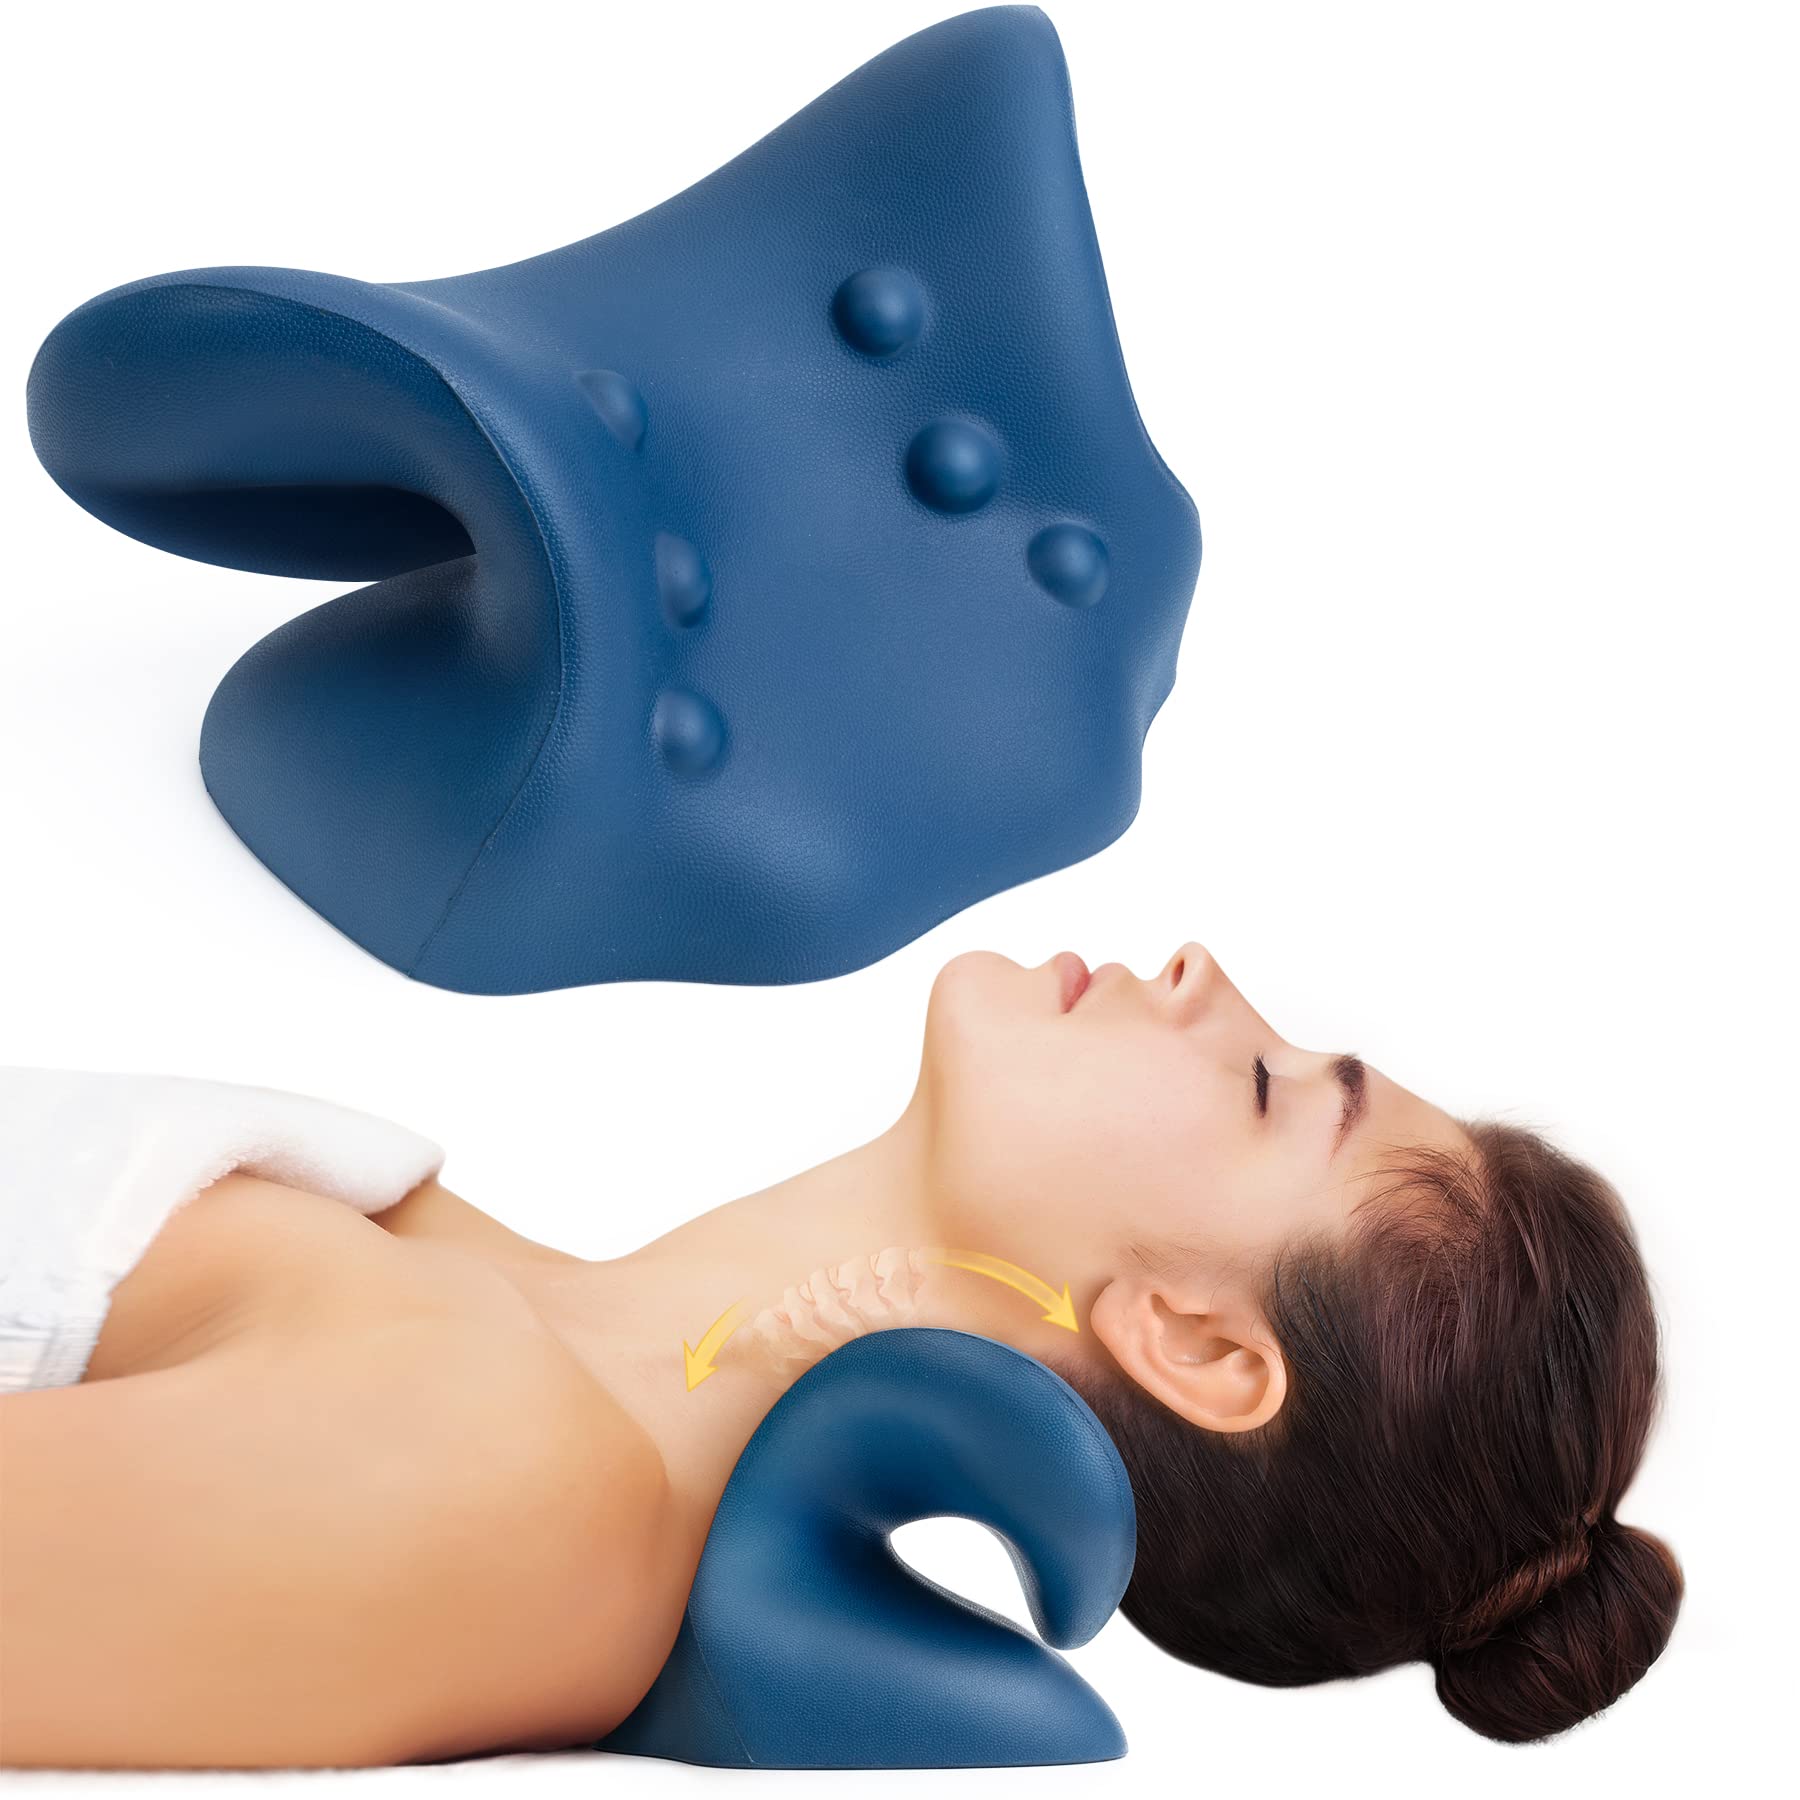 REARAND Neck and Shoulder Relaxer,Neck Pain Relief,Tension Headache  Relief,Neck Support,Neck Traction Pillow Chiropractic Pillow and Cervical  Spine Alignment,TMJ